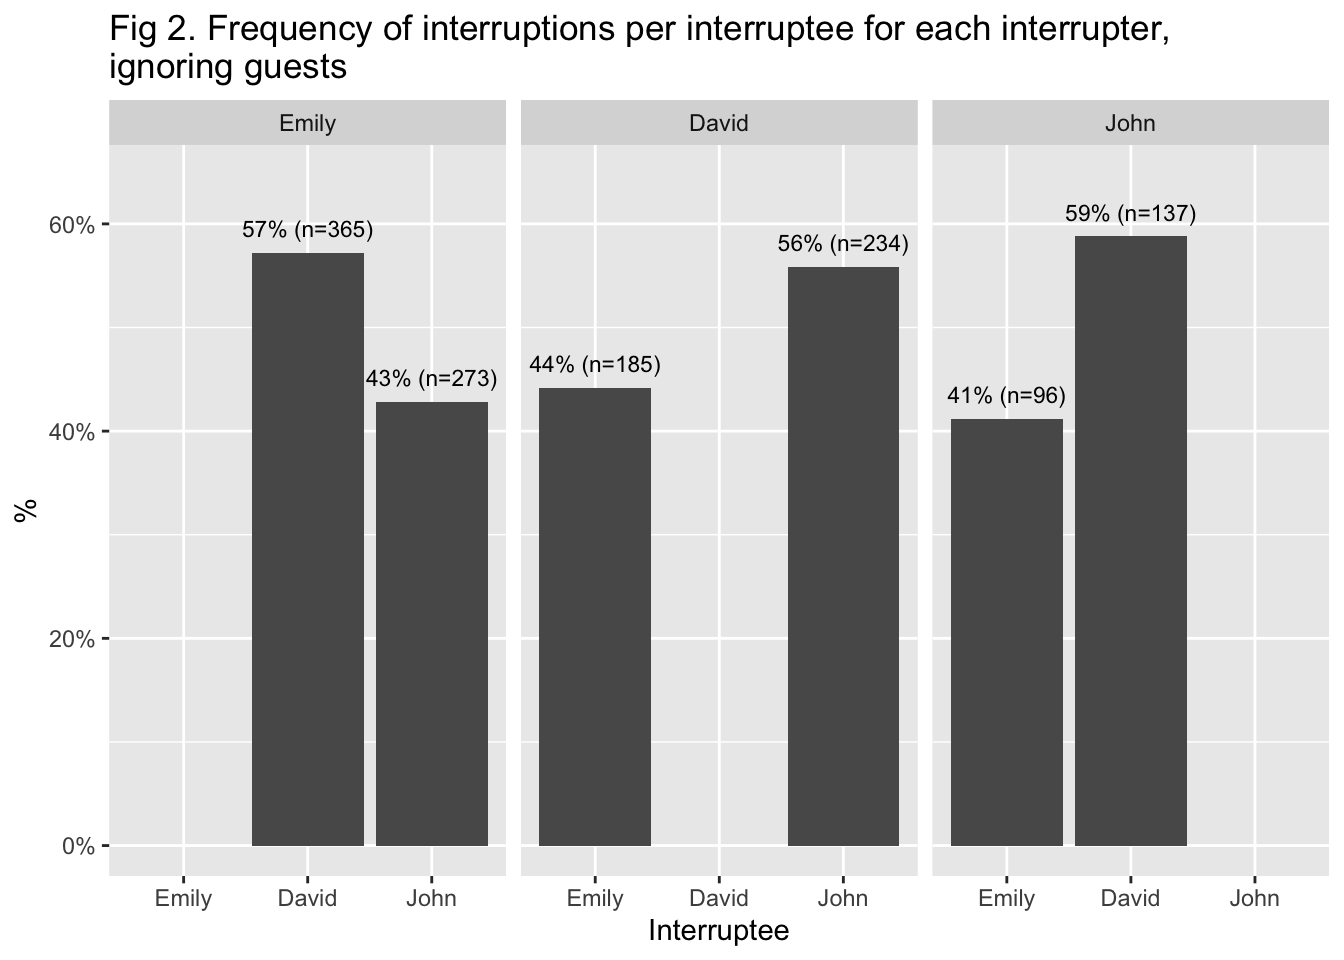 Figure 2 Frequency of interruptions per interruptee for each interrupter, ignoring guests. Shows both John and Emily interrupt David the most often, and David interrupts John the most often.